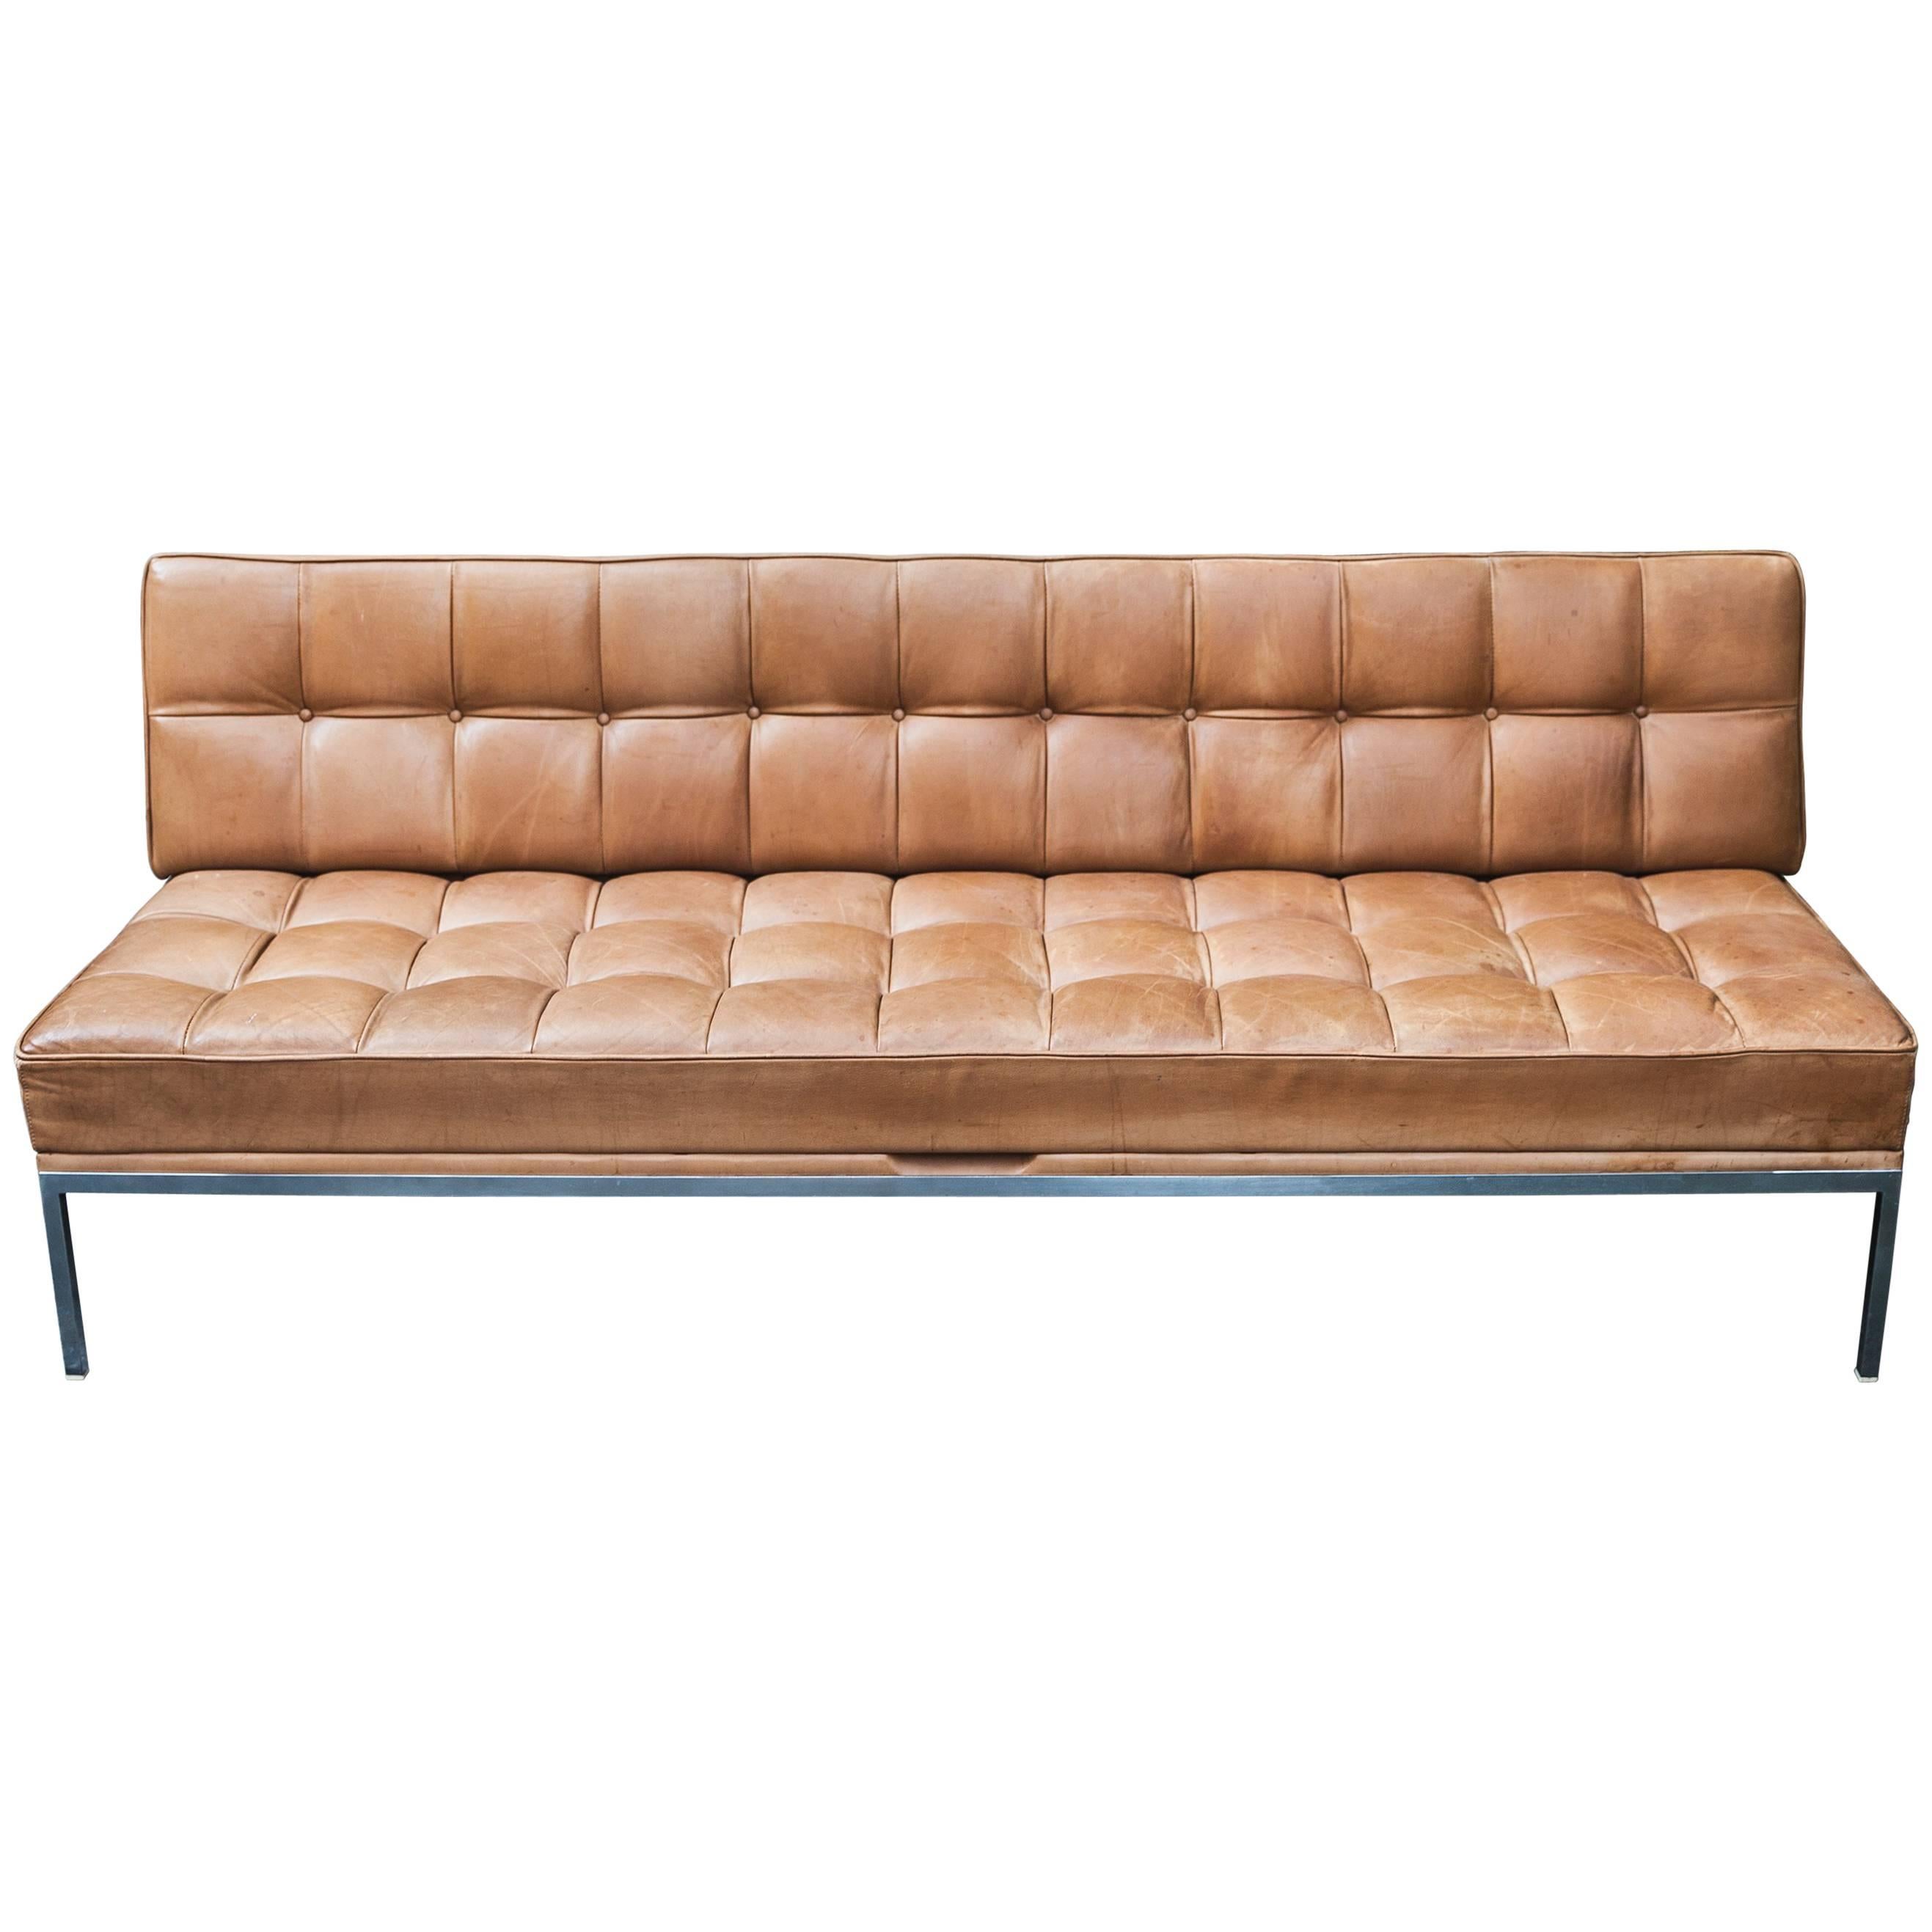 Johannes Spalt Constanze Sofa Daybed Natural Leather